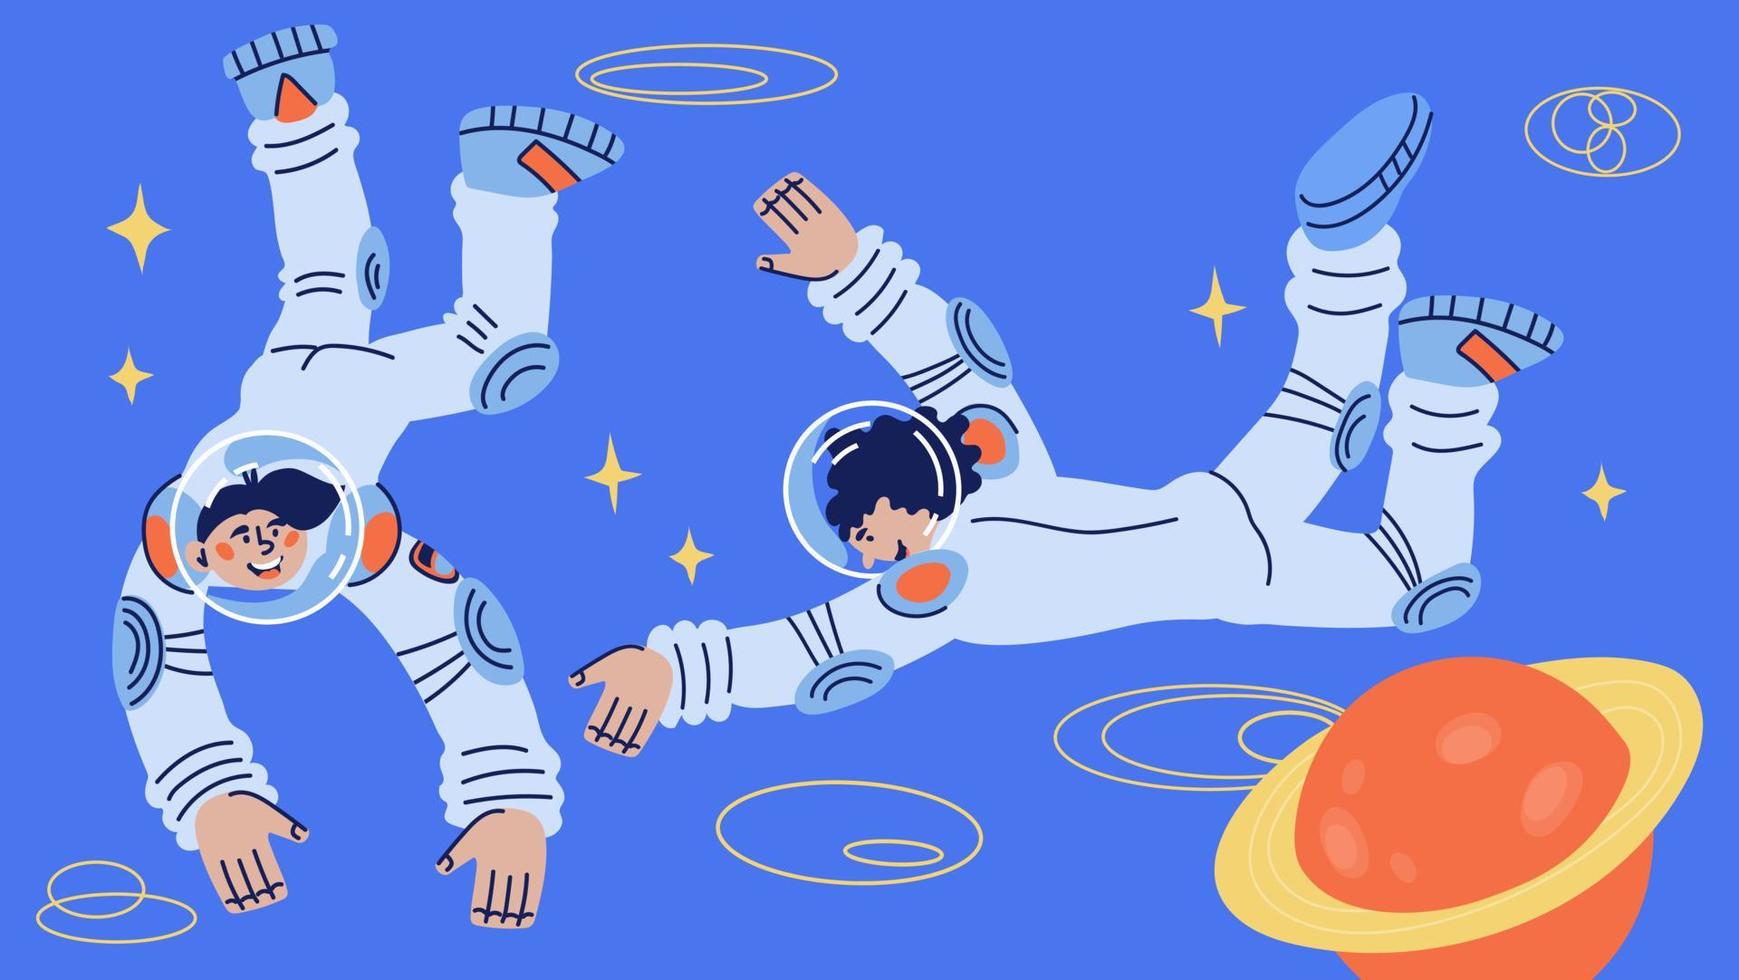 Cosmos and universe research banner template with astronauts or spaceman and woman characters in outer space. Journey to stars and world exploring. Flat cartoon vector illustration.